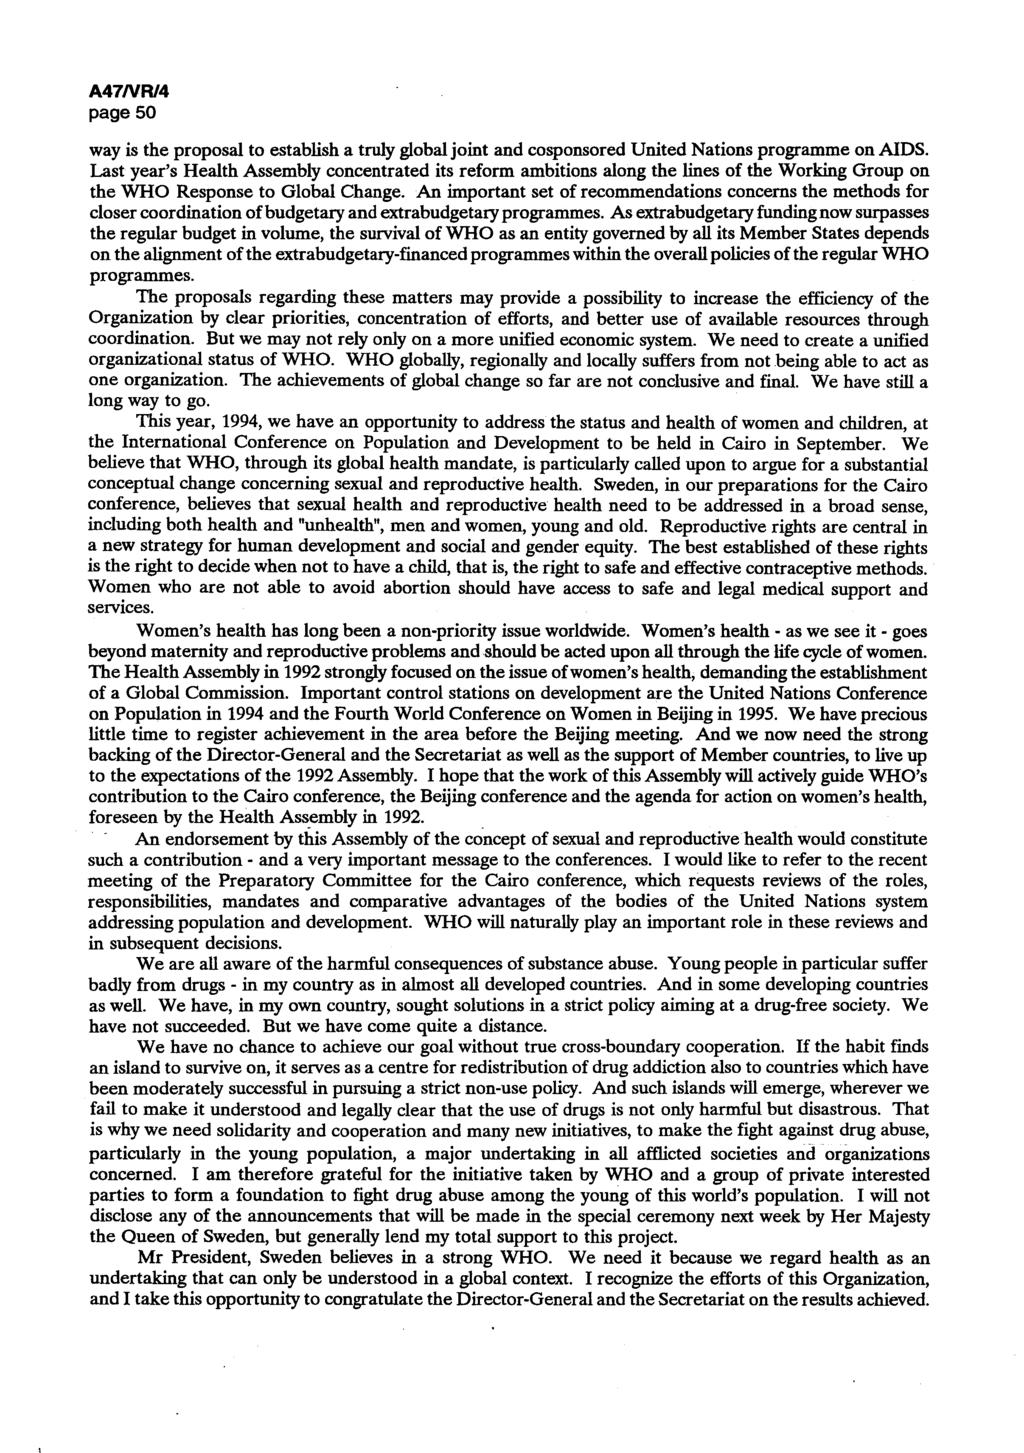 A47/VR/2 page 50 way is the proposal to establish a truly global joint and cosponsored United Nations programme on AIDS.